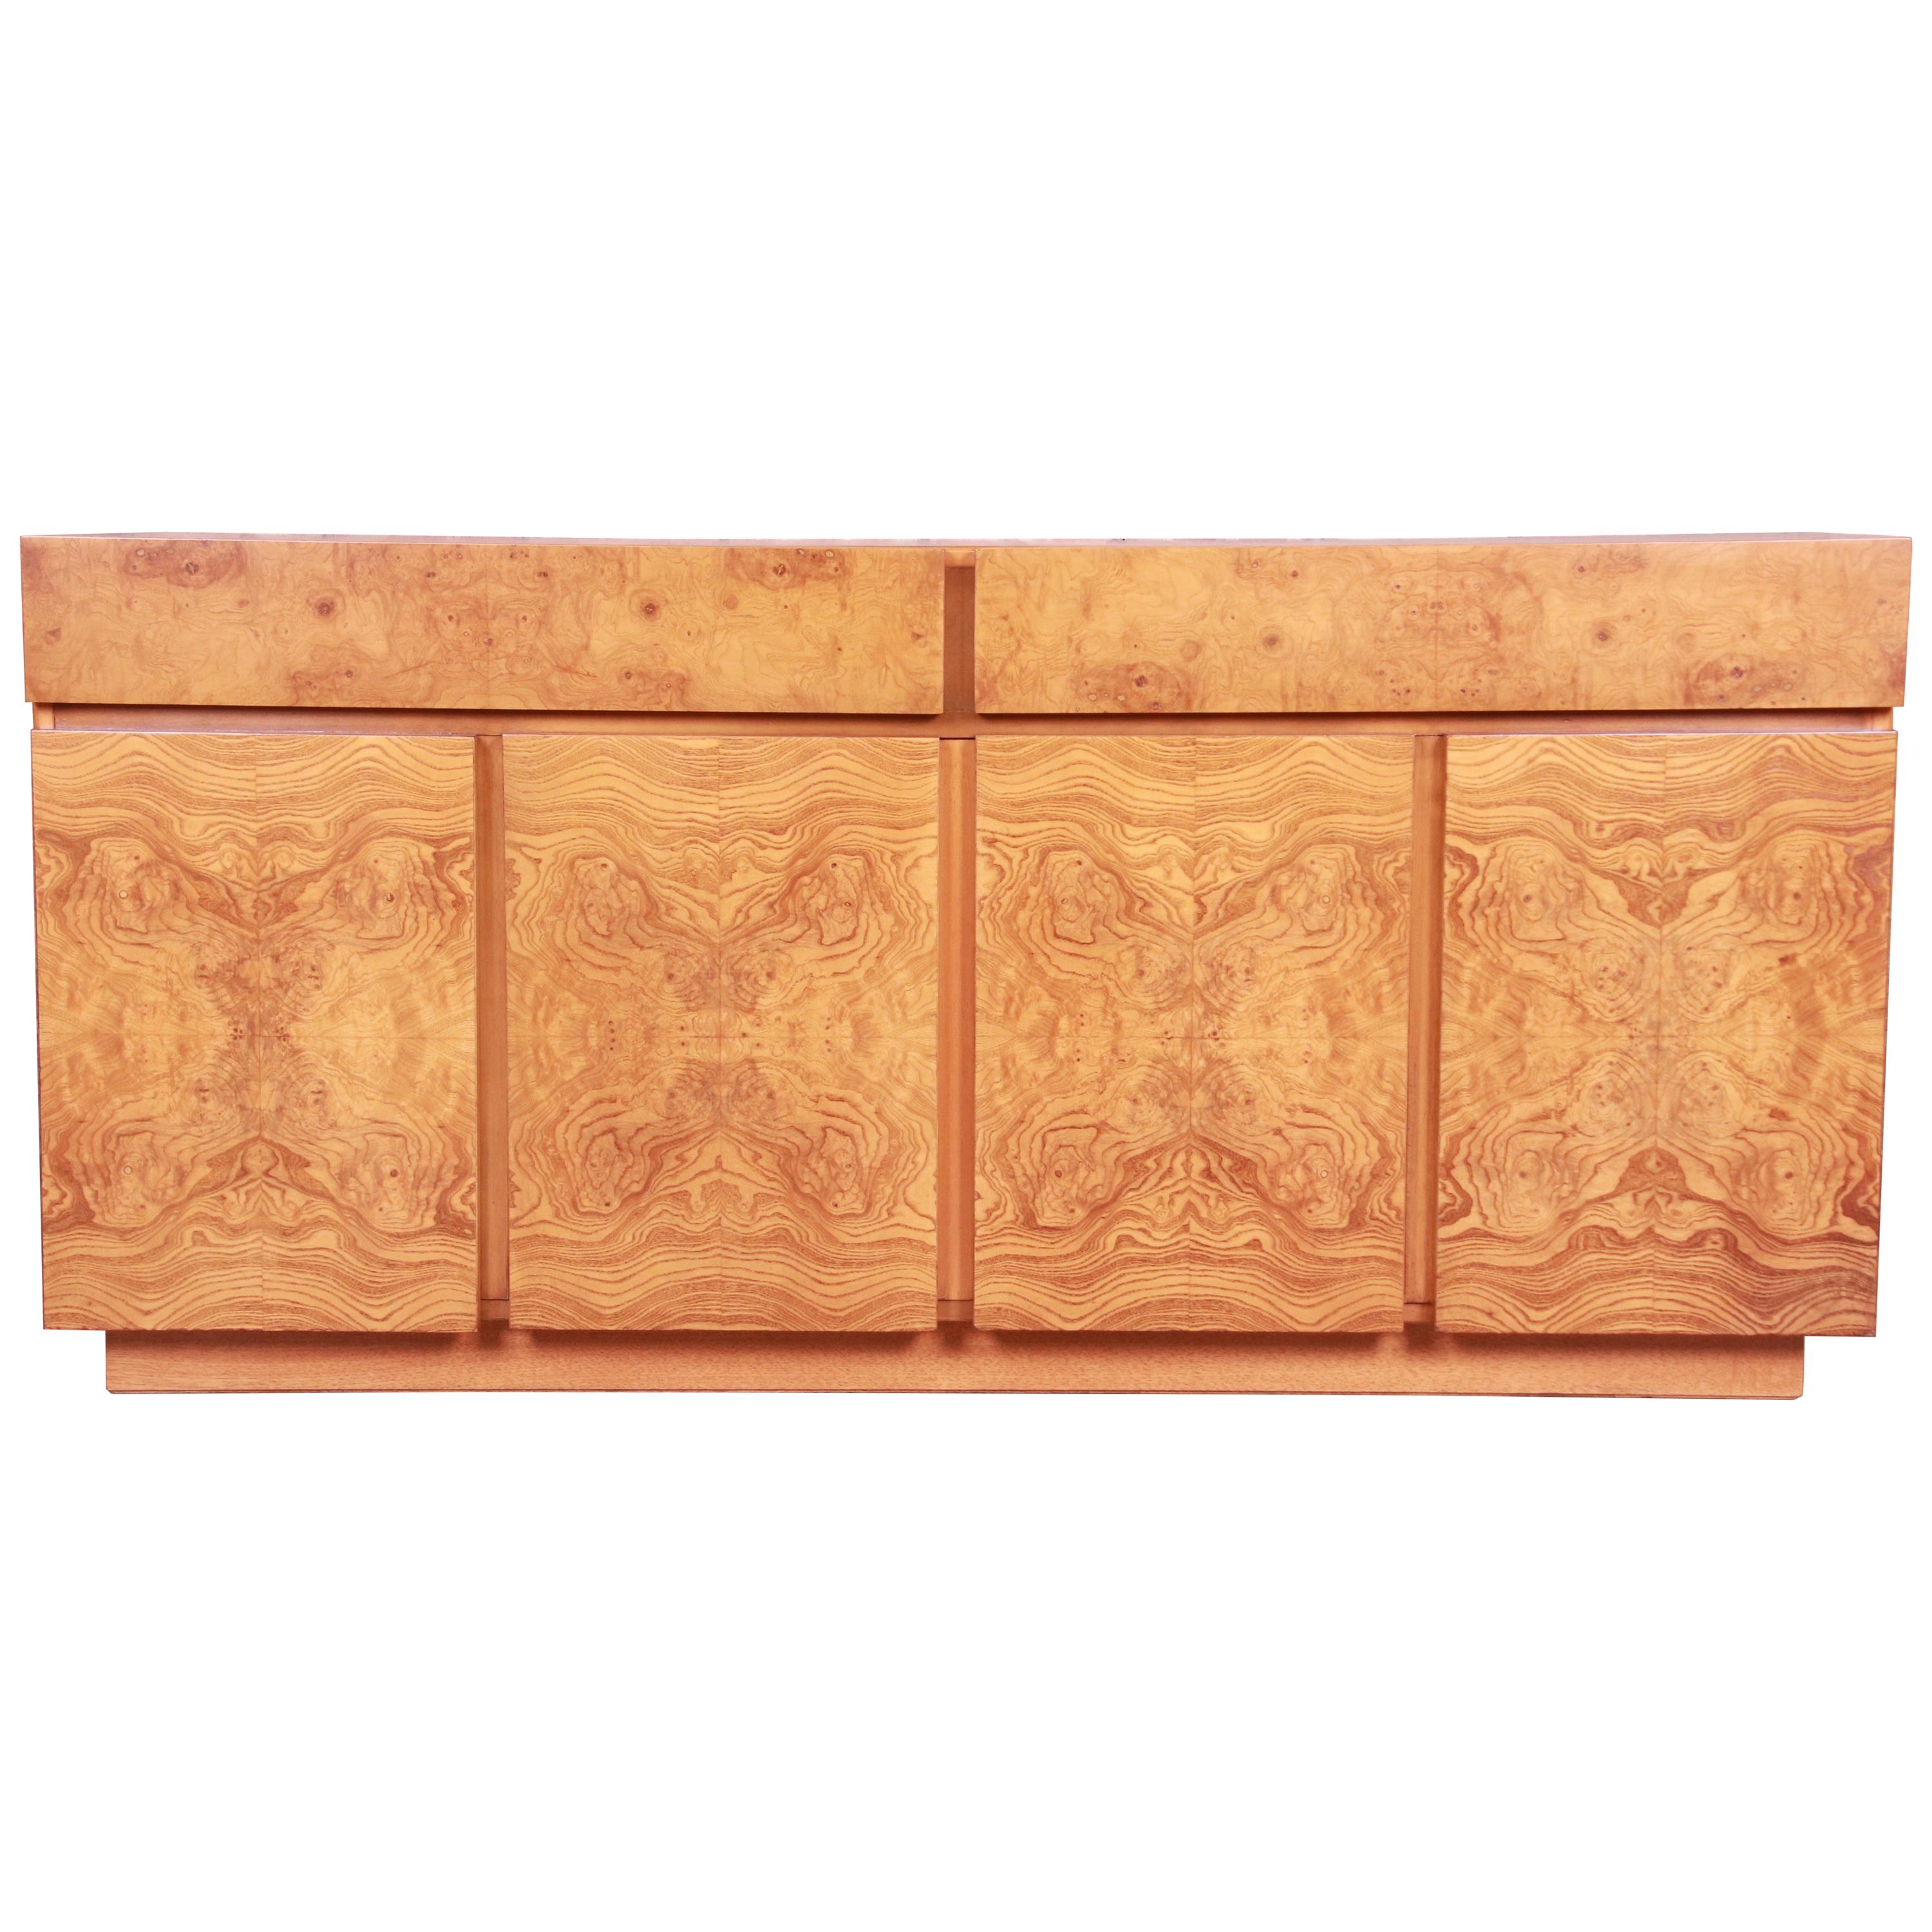 Milo Baughman Style Burl Wood Sideboard Credenza by Lane, Newly Refinished